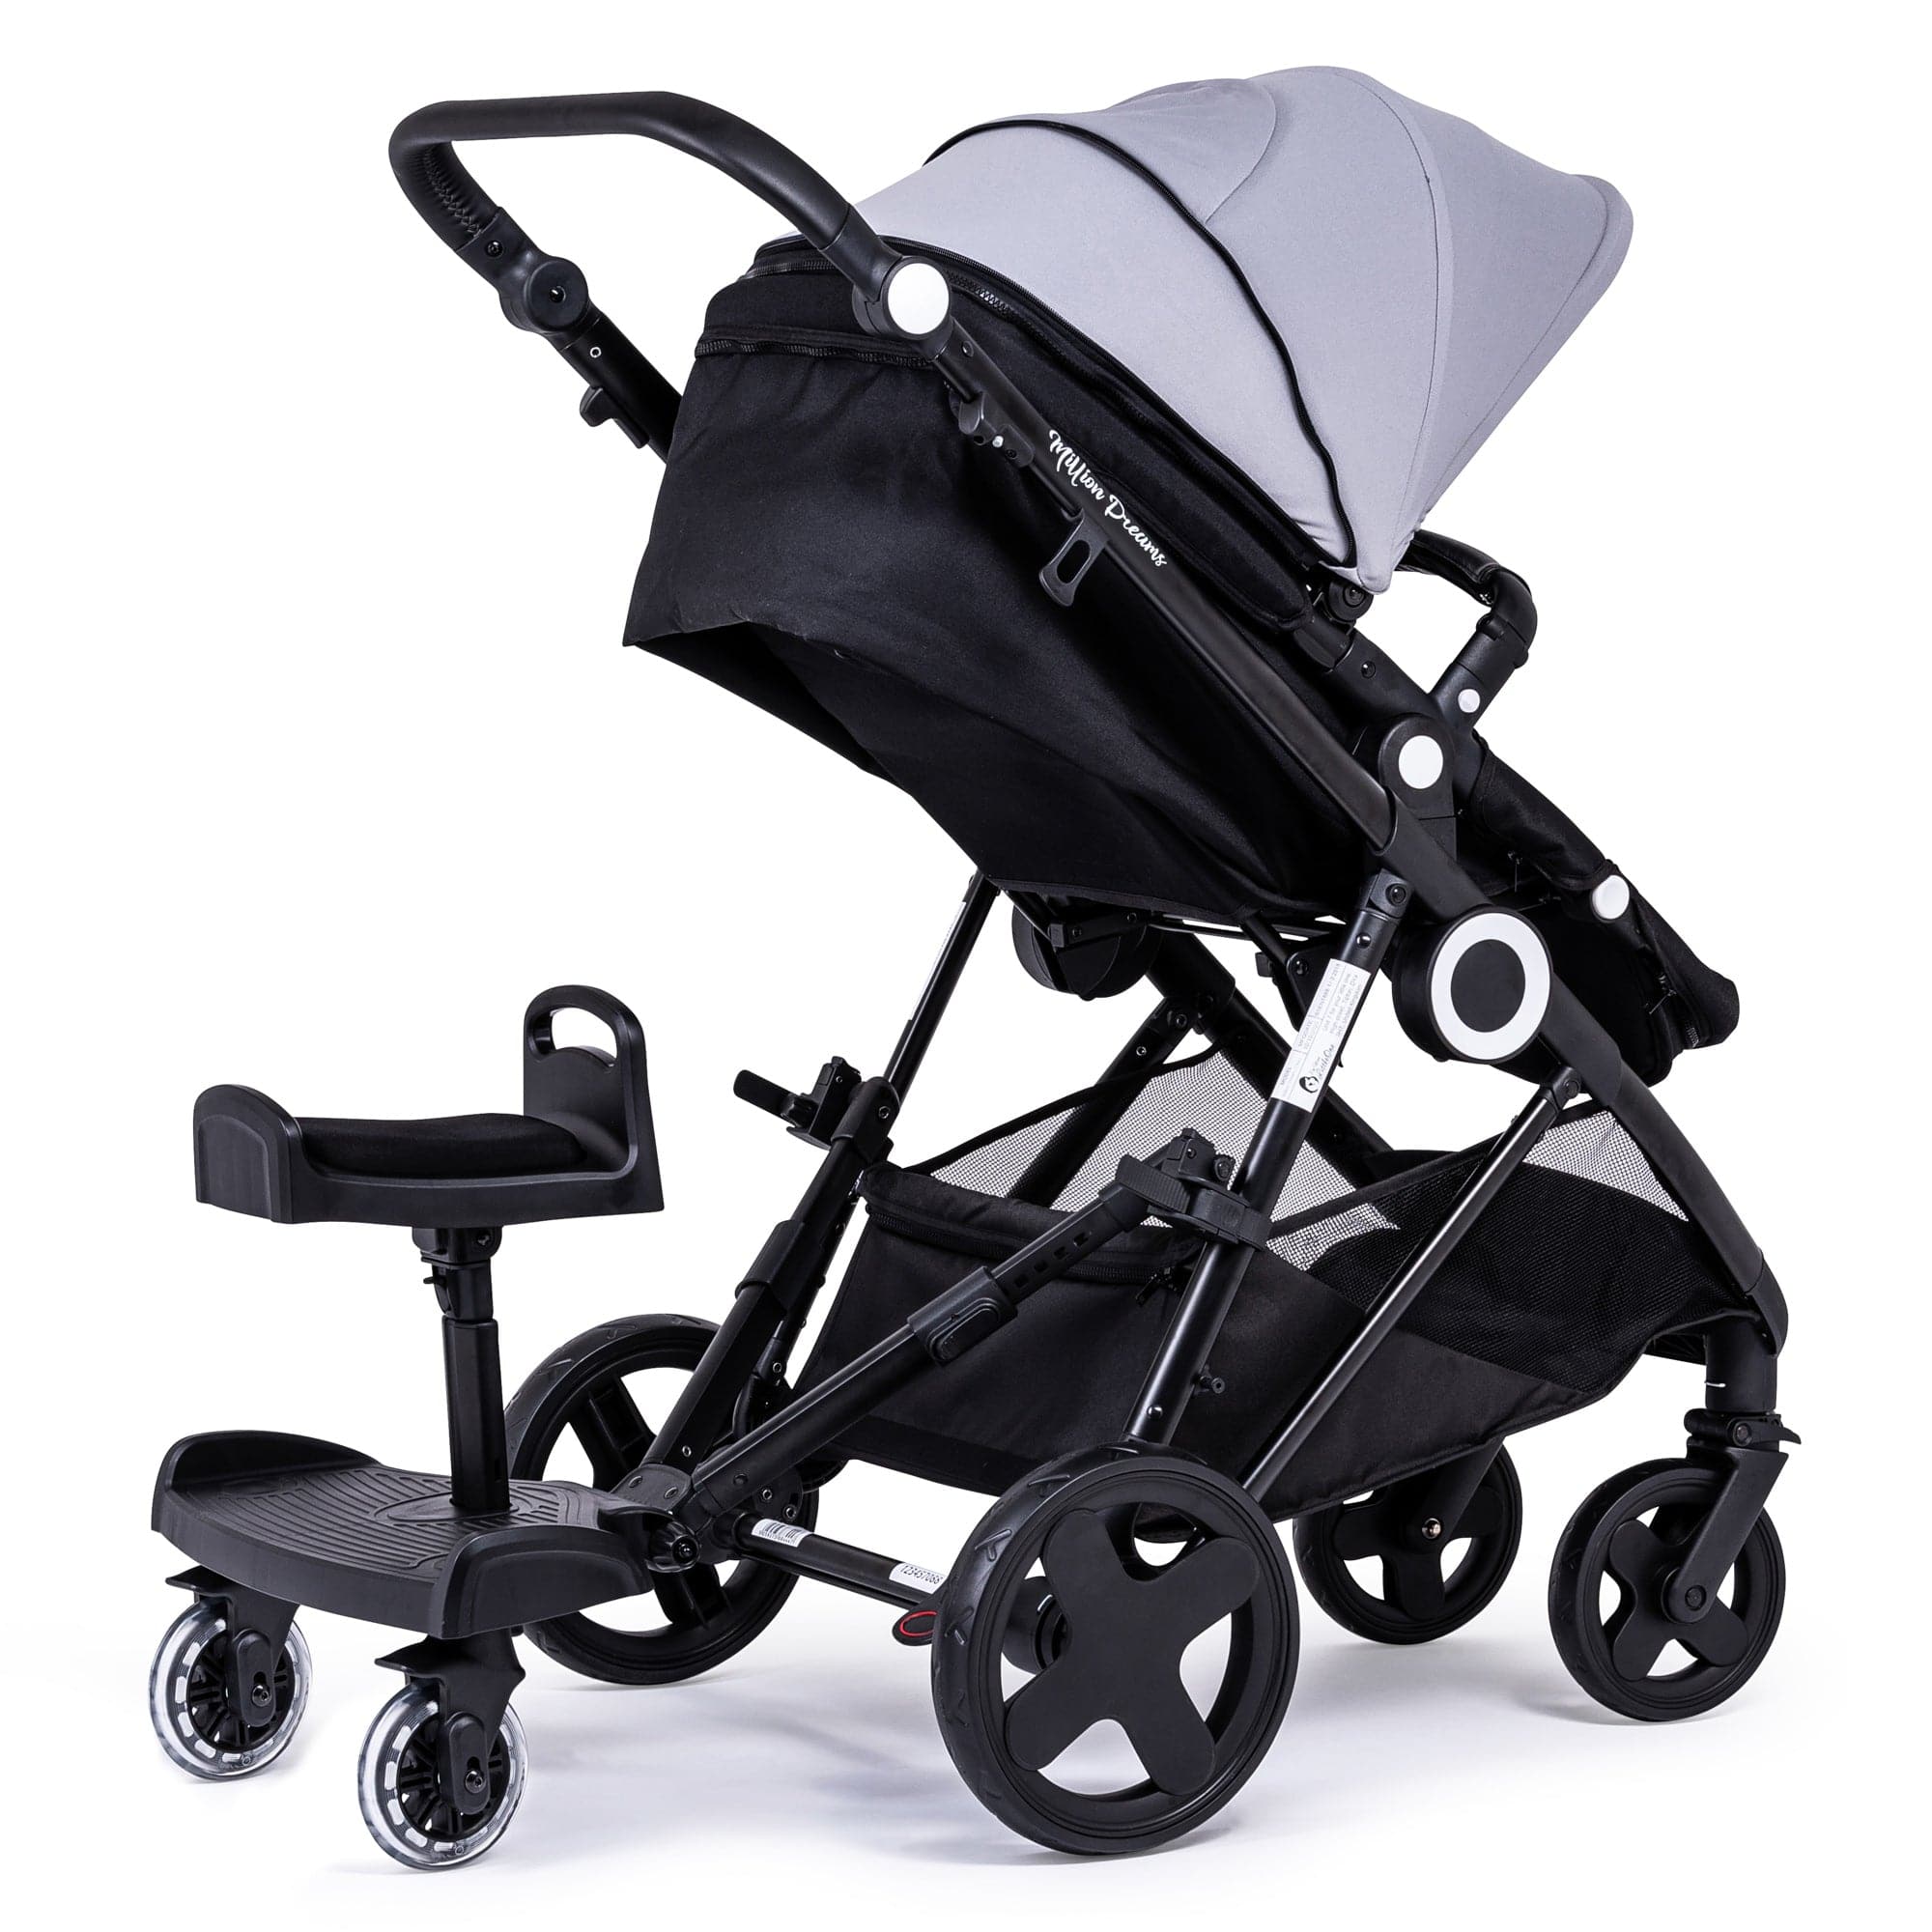 Ride On Board with Seat Compatible with Recaro - For Your Little One